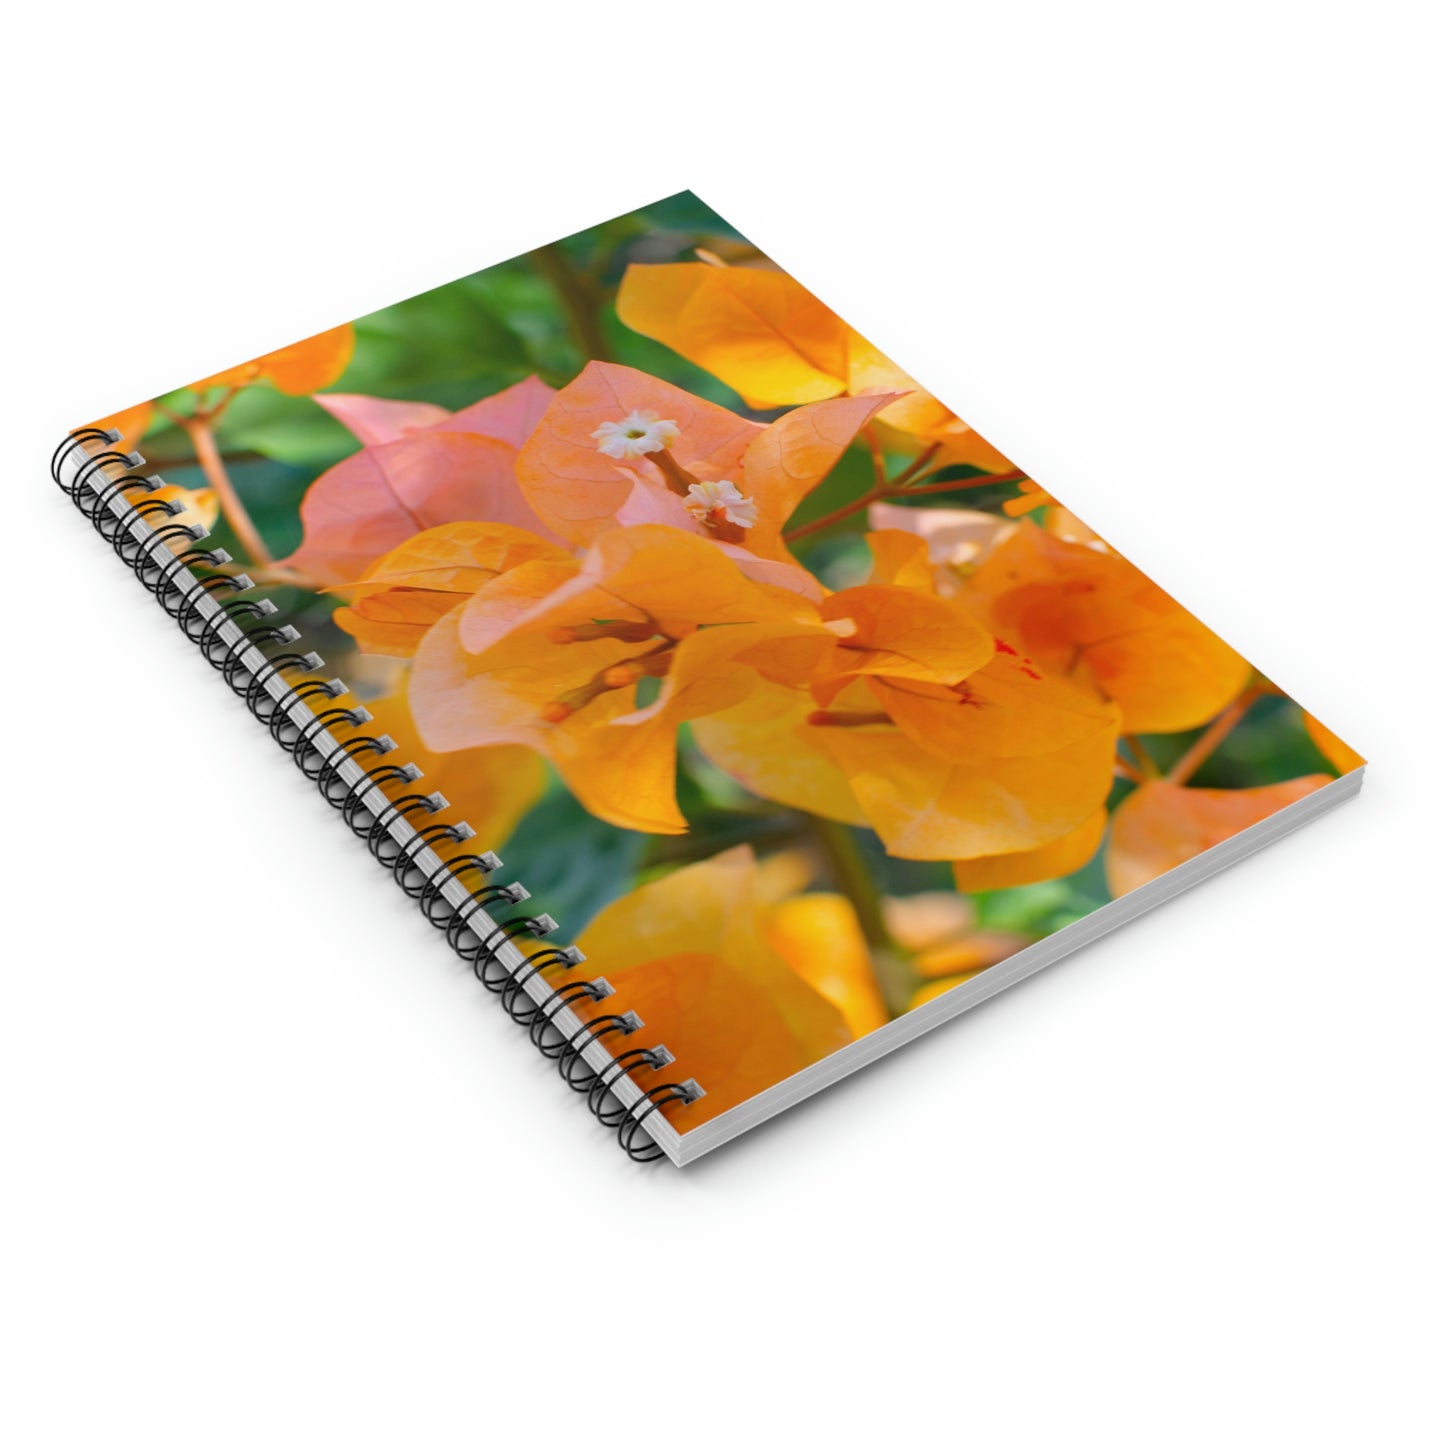 Flowers 29 Spiral Notebook - Ruled Line